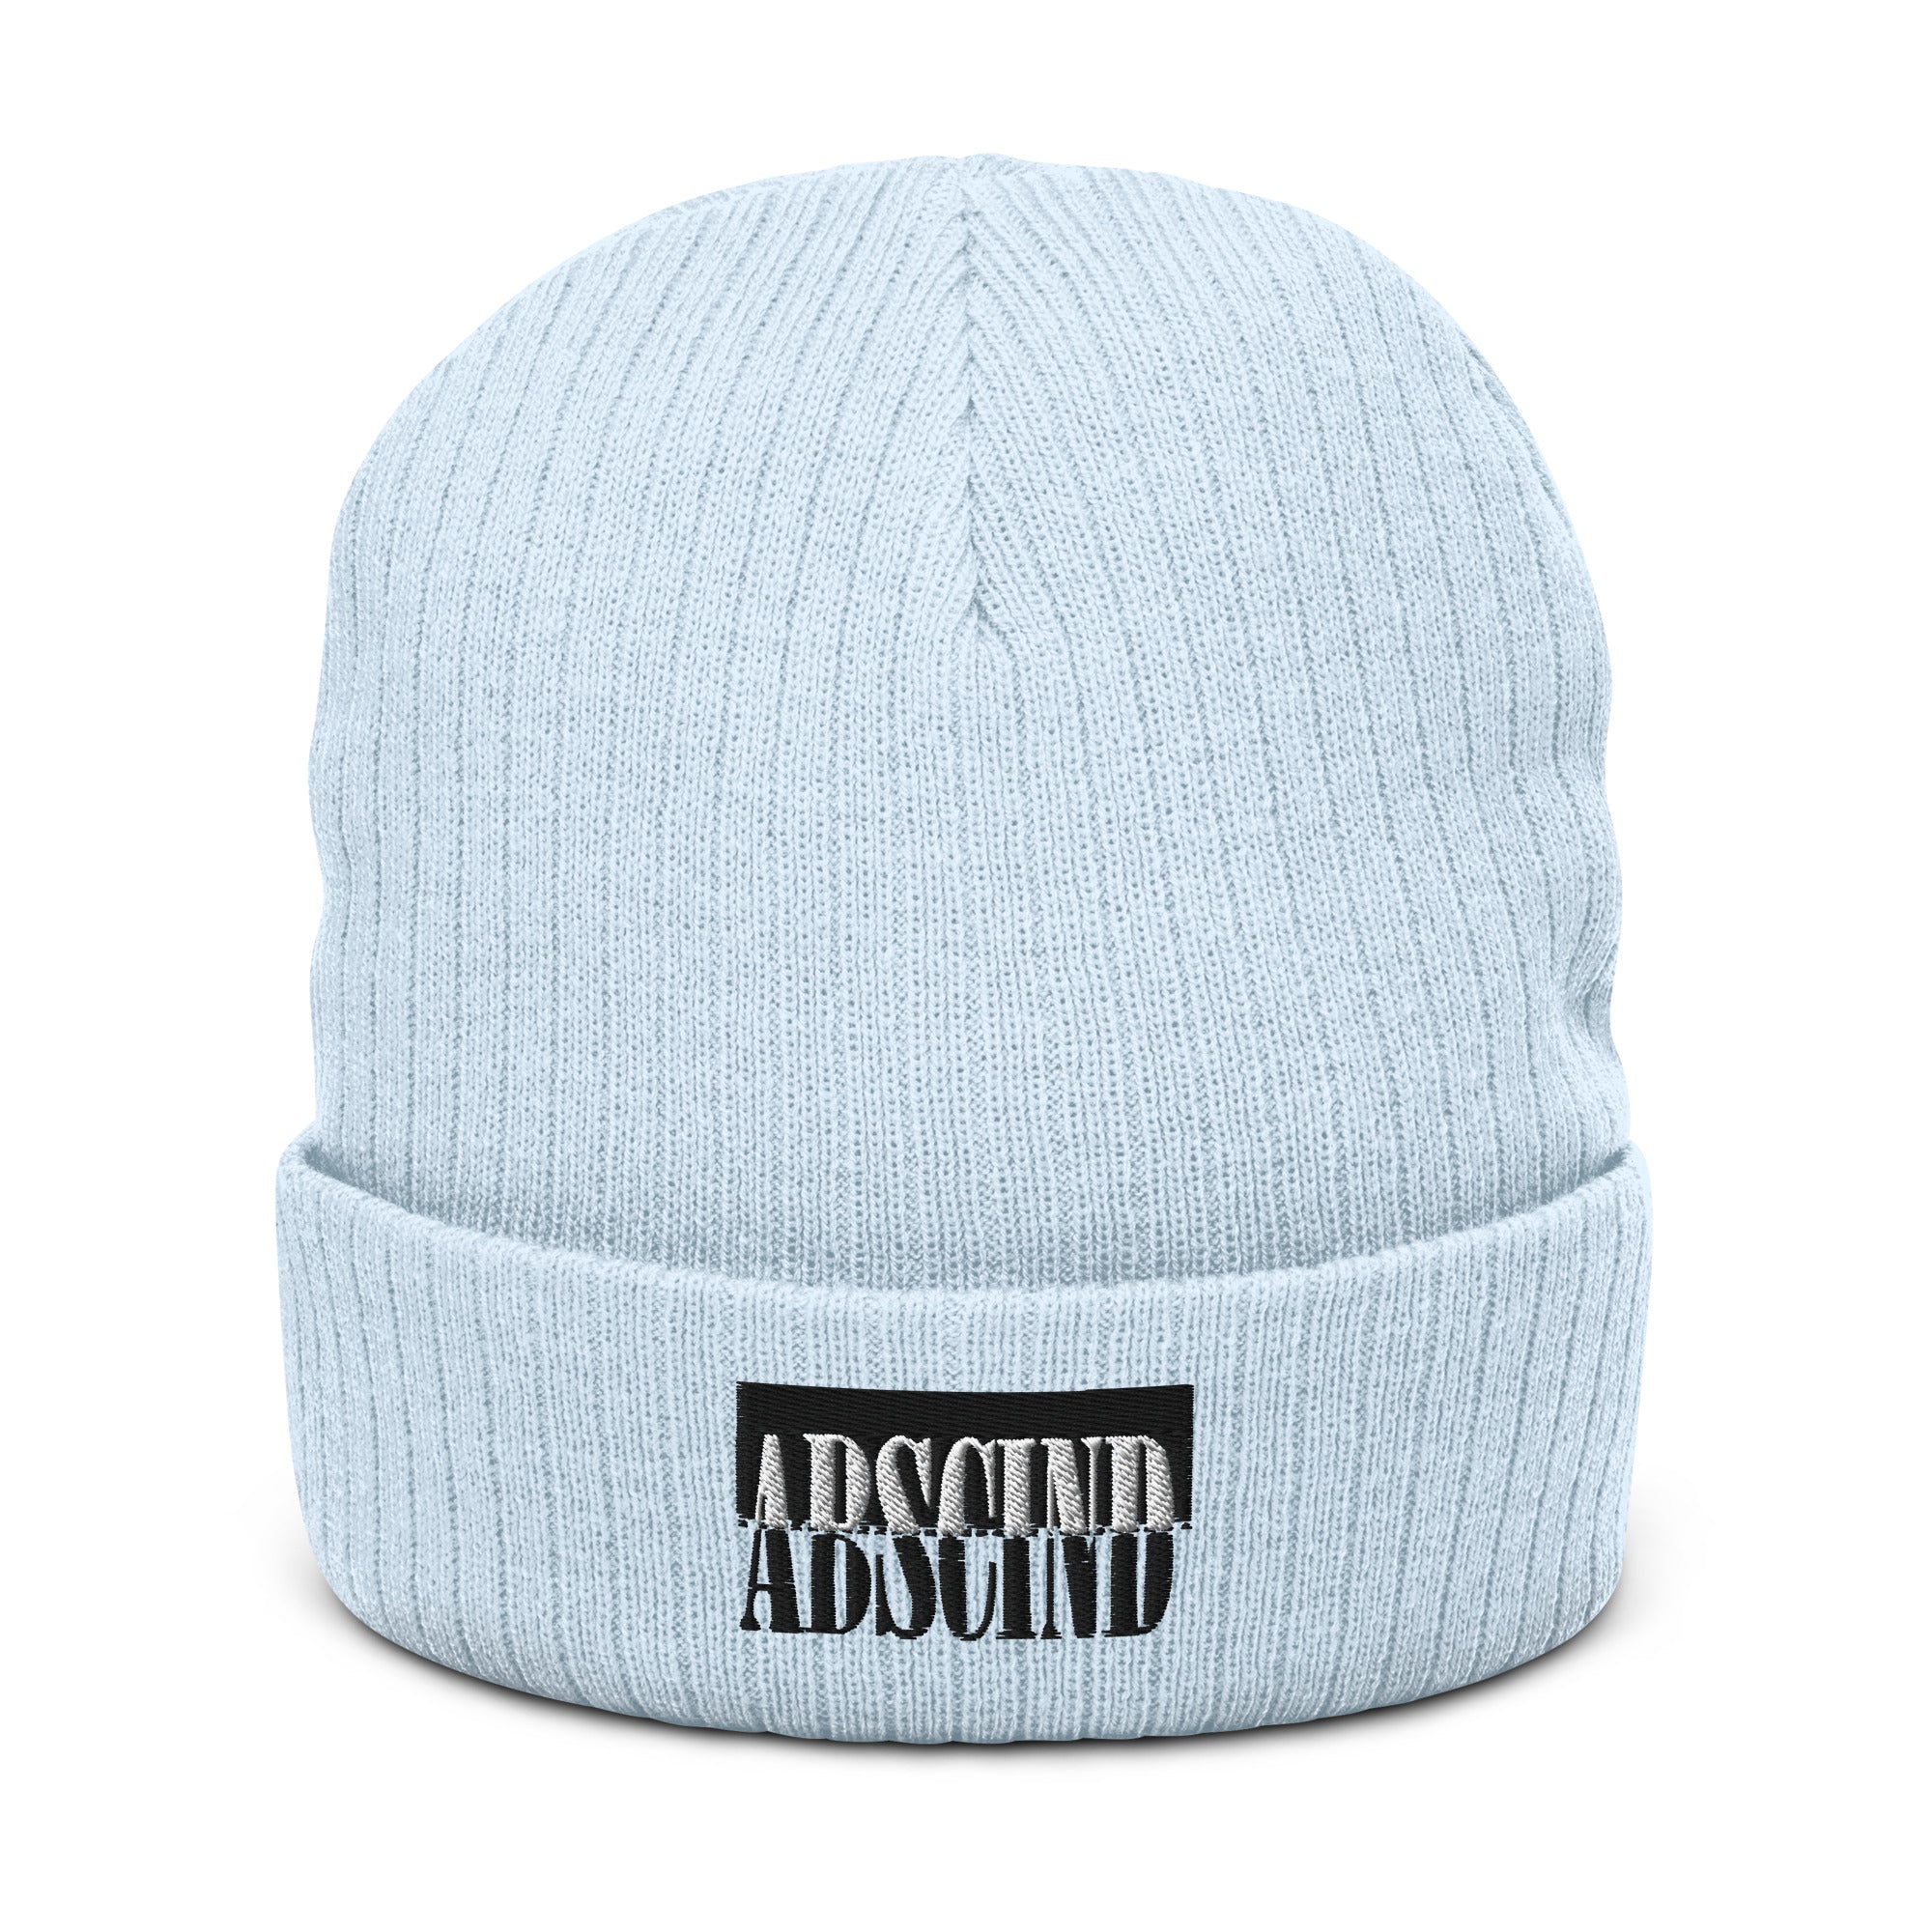 Abscind Ribbed knit beanie